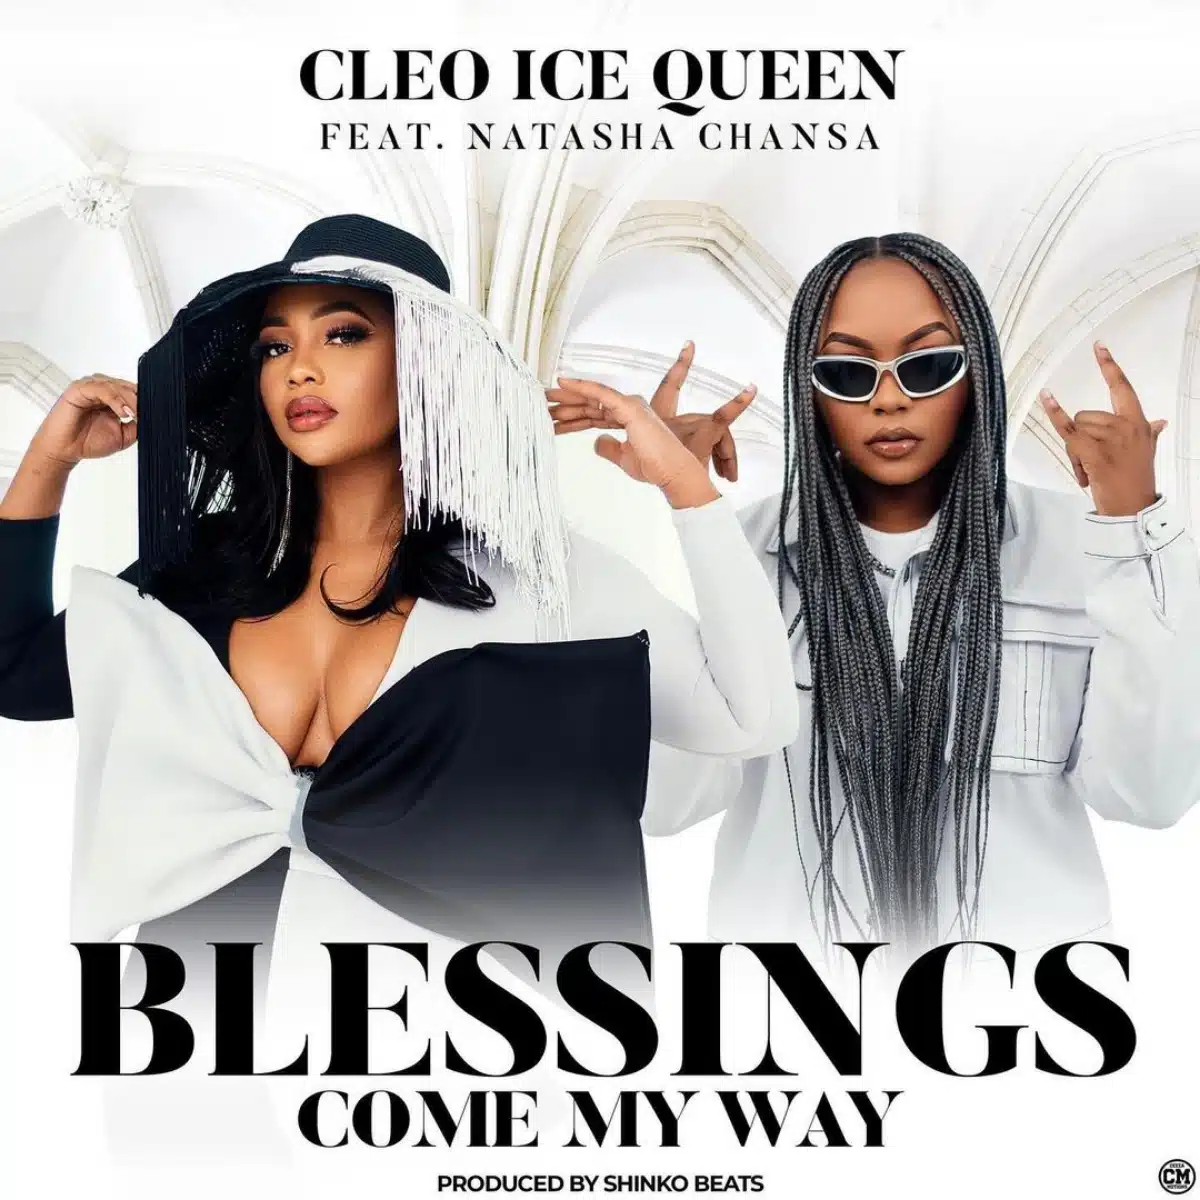 DOWNLOAD: Cleo Ice Queen Ft Natasha Chansa – “Blessings Come My Way” Mp3